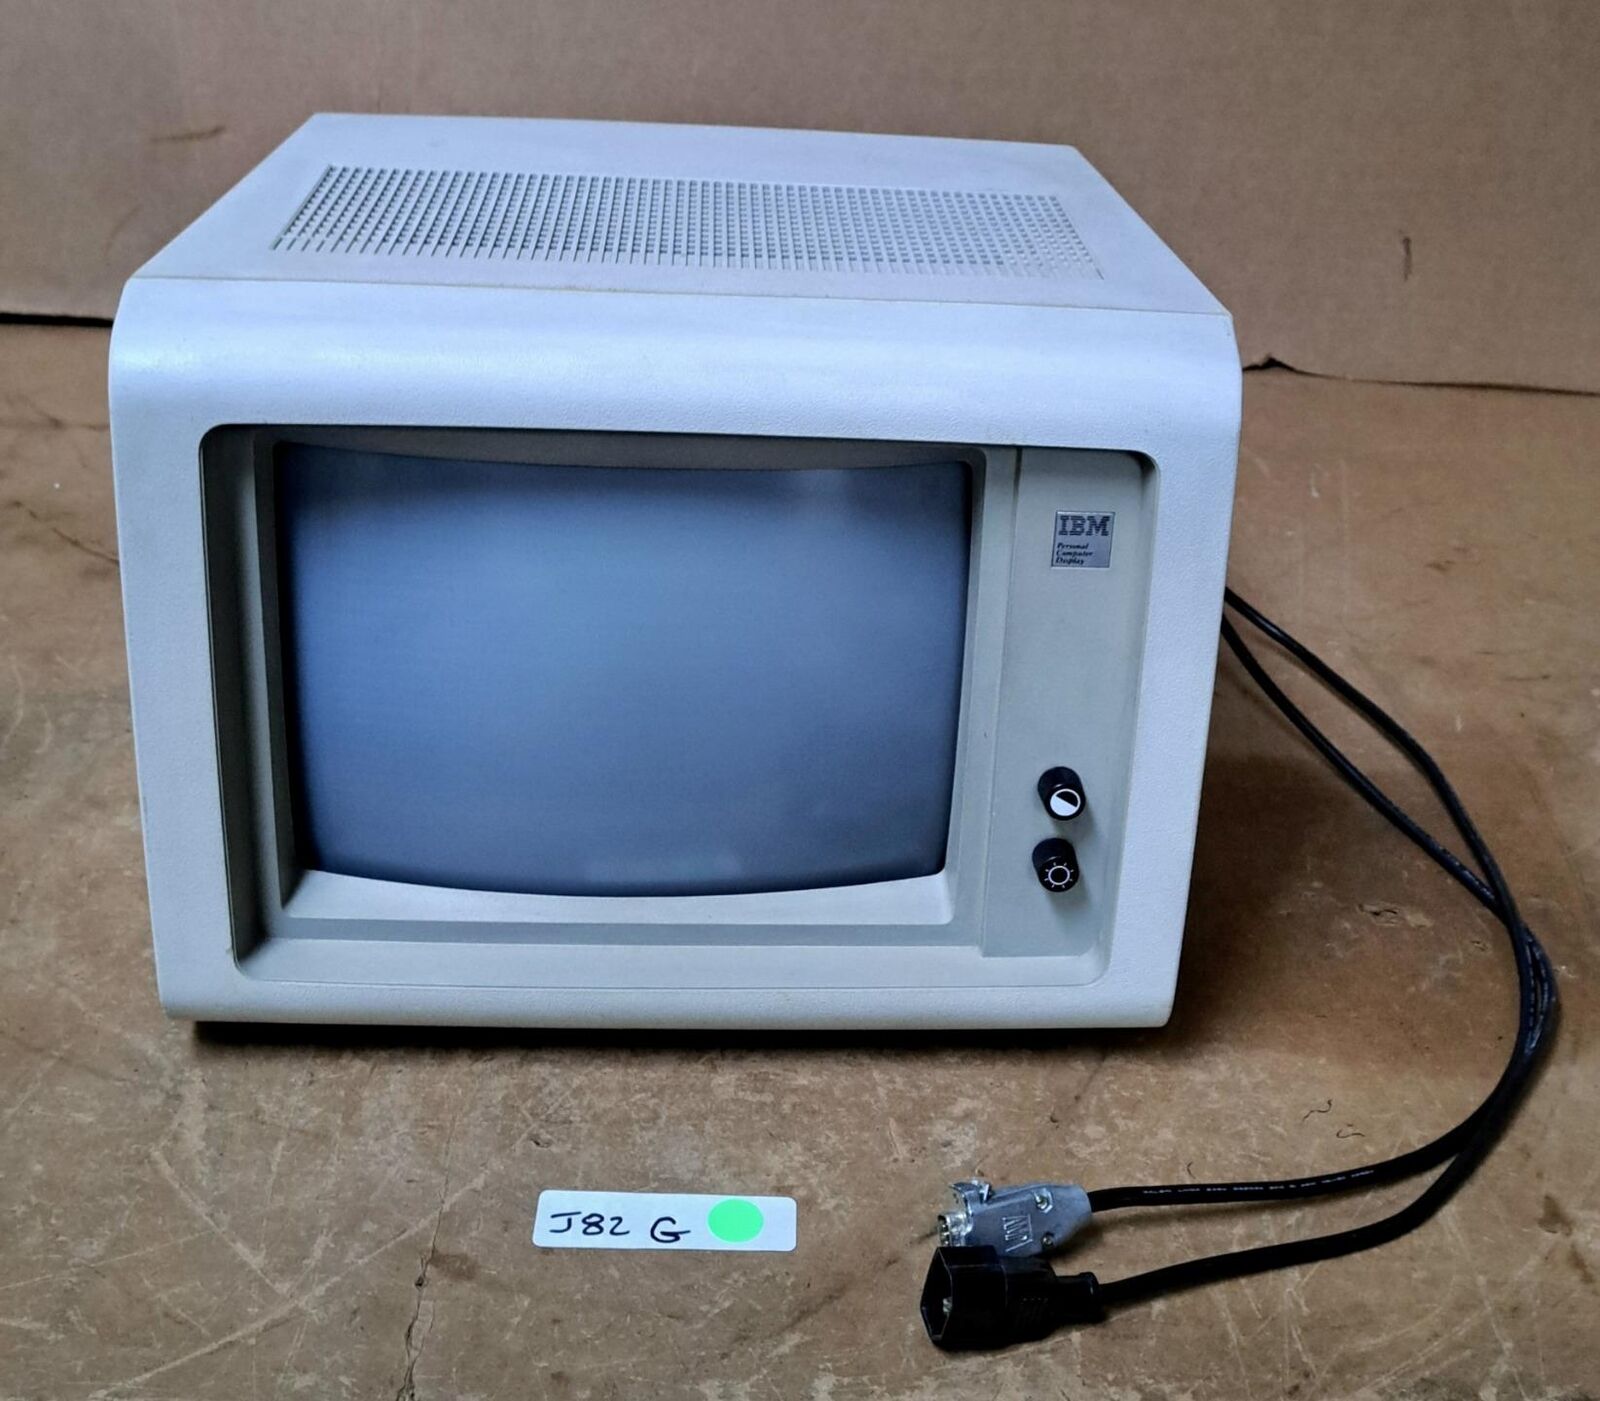 RARE IBM 5151 5151001 COMPUTER MONITOR TESTED AND WORKING   G